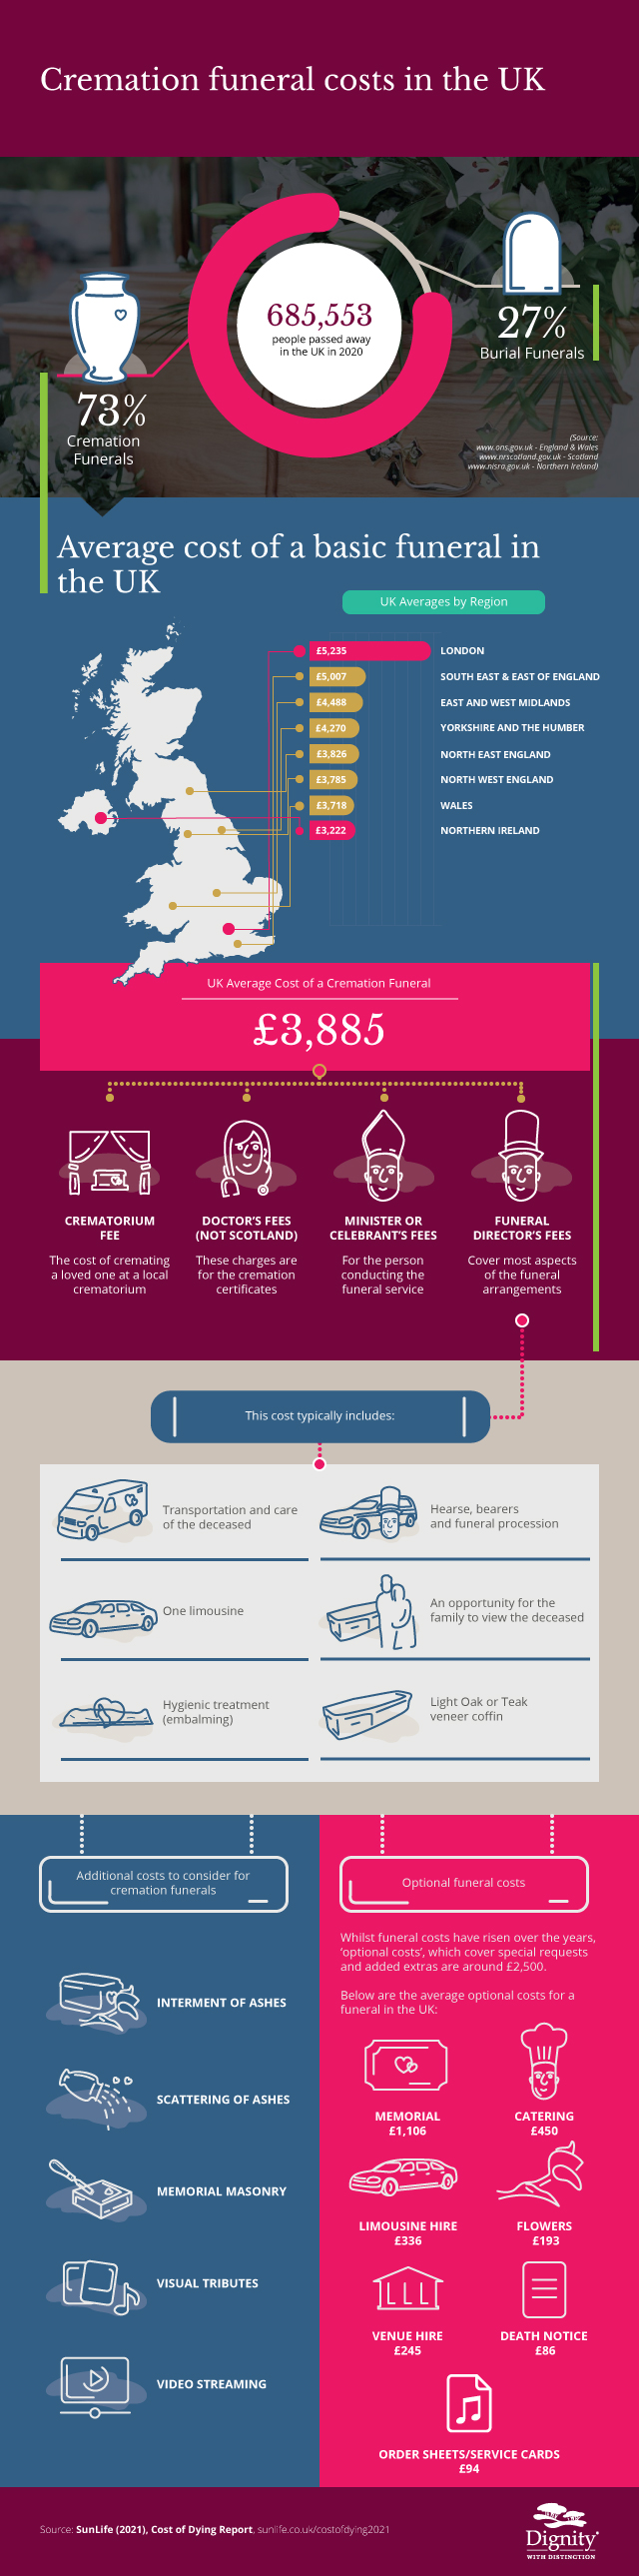 Cremation costs in the UK 2020 | Dignity Funerals